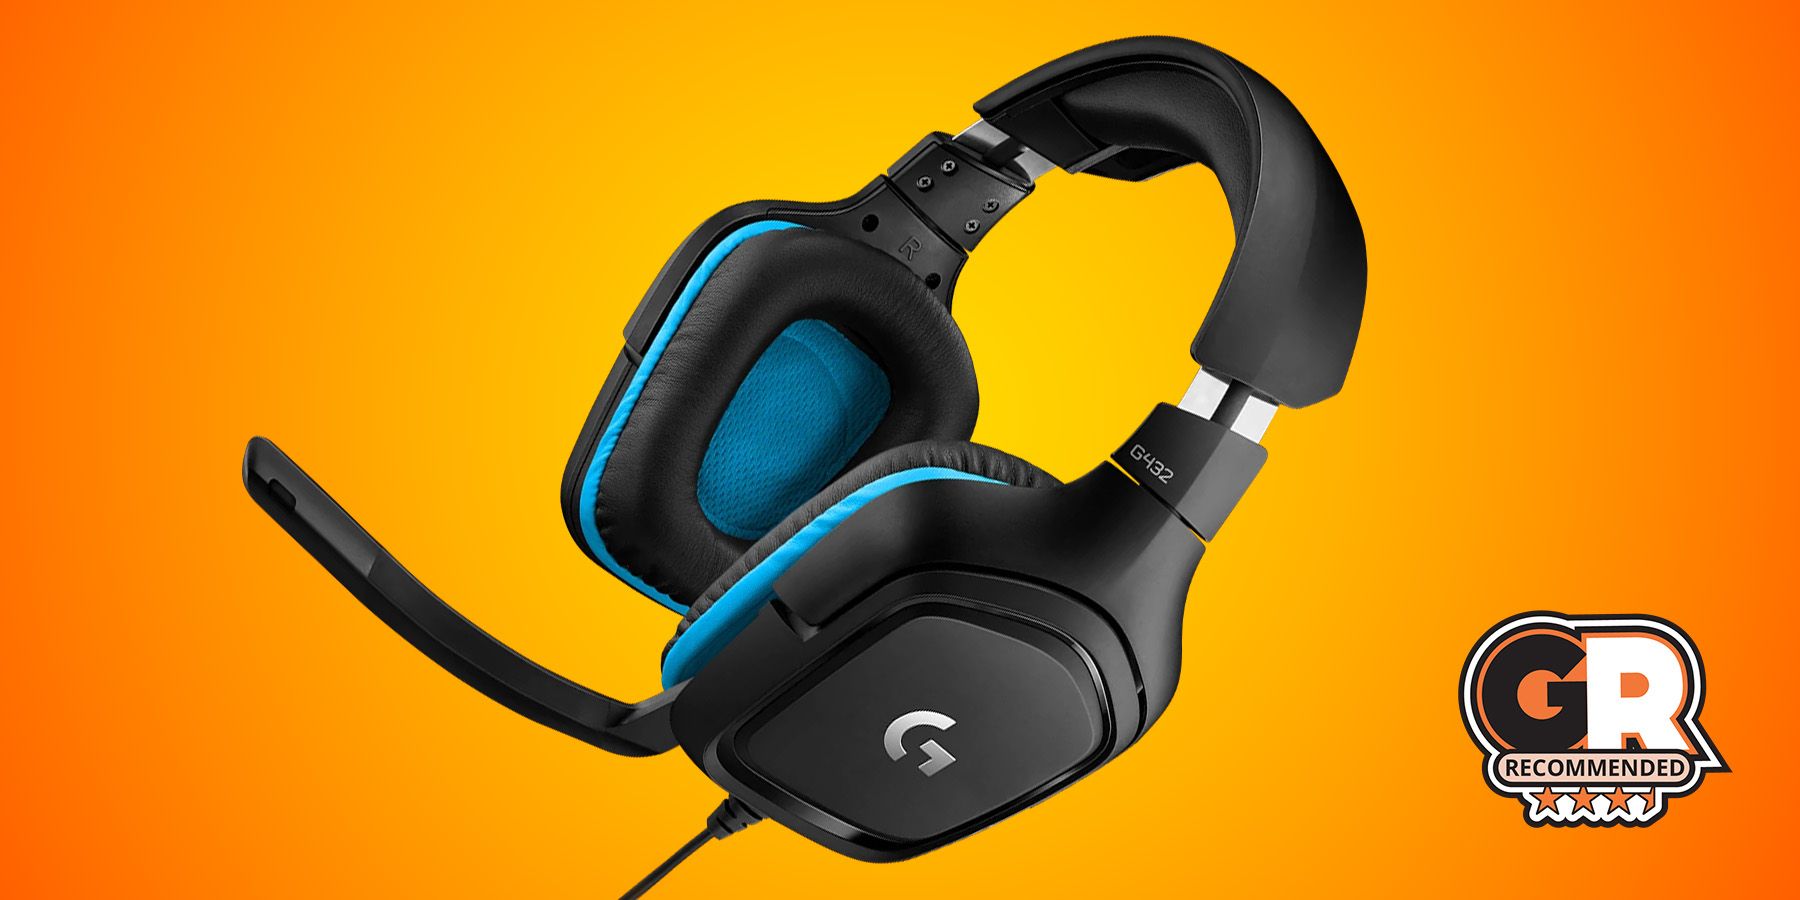 Logitech G432 review: A brilliant budget gaming headset